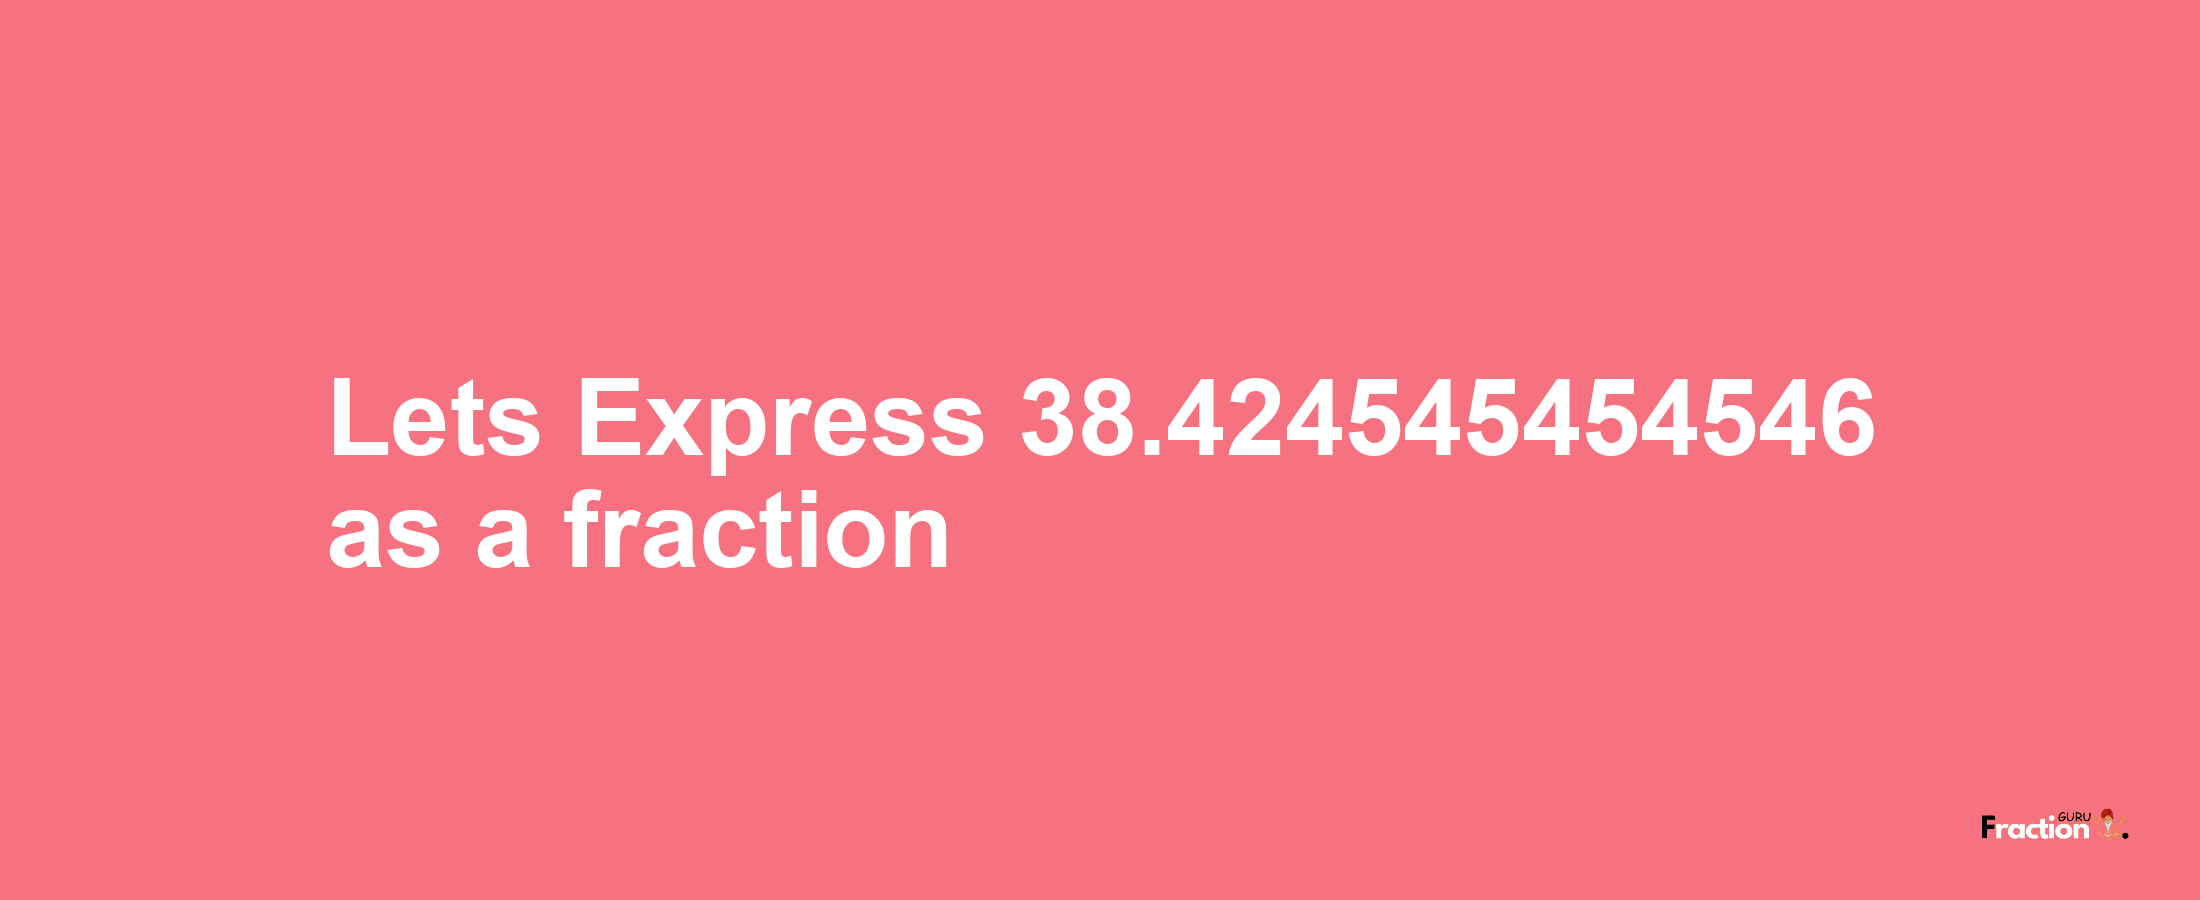 Lets Express 38.424545454546 as afraction